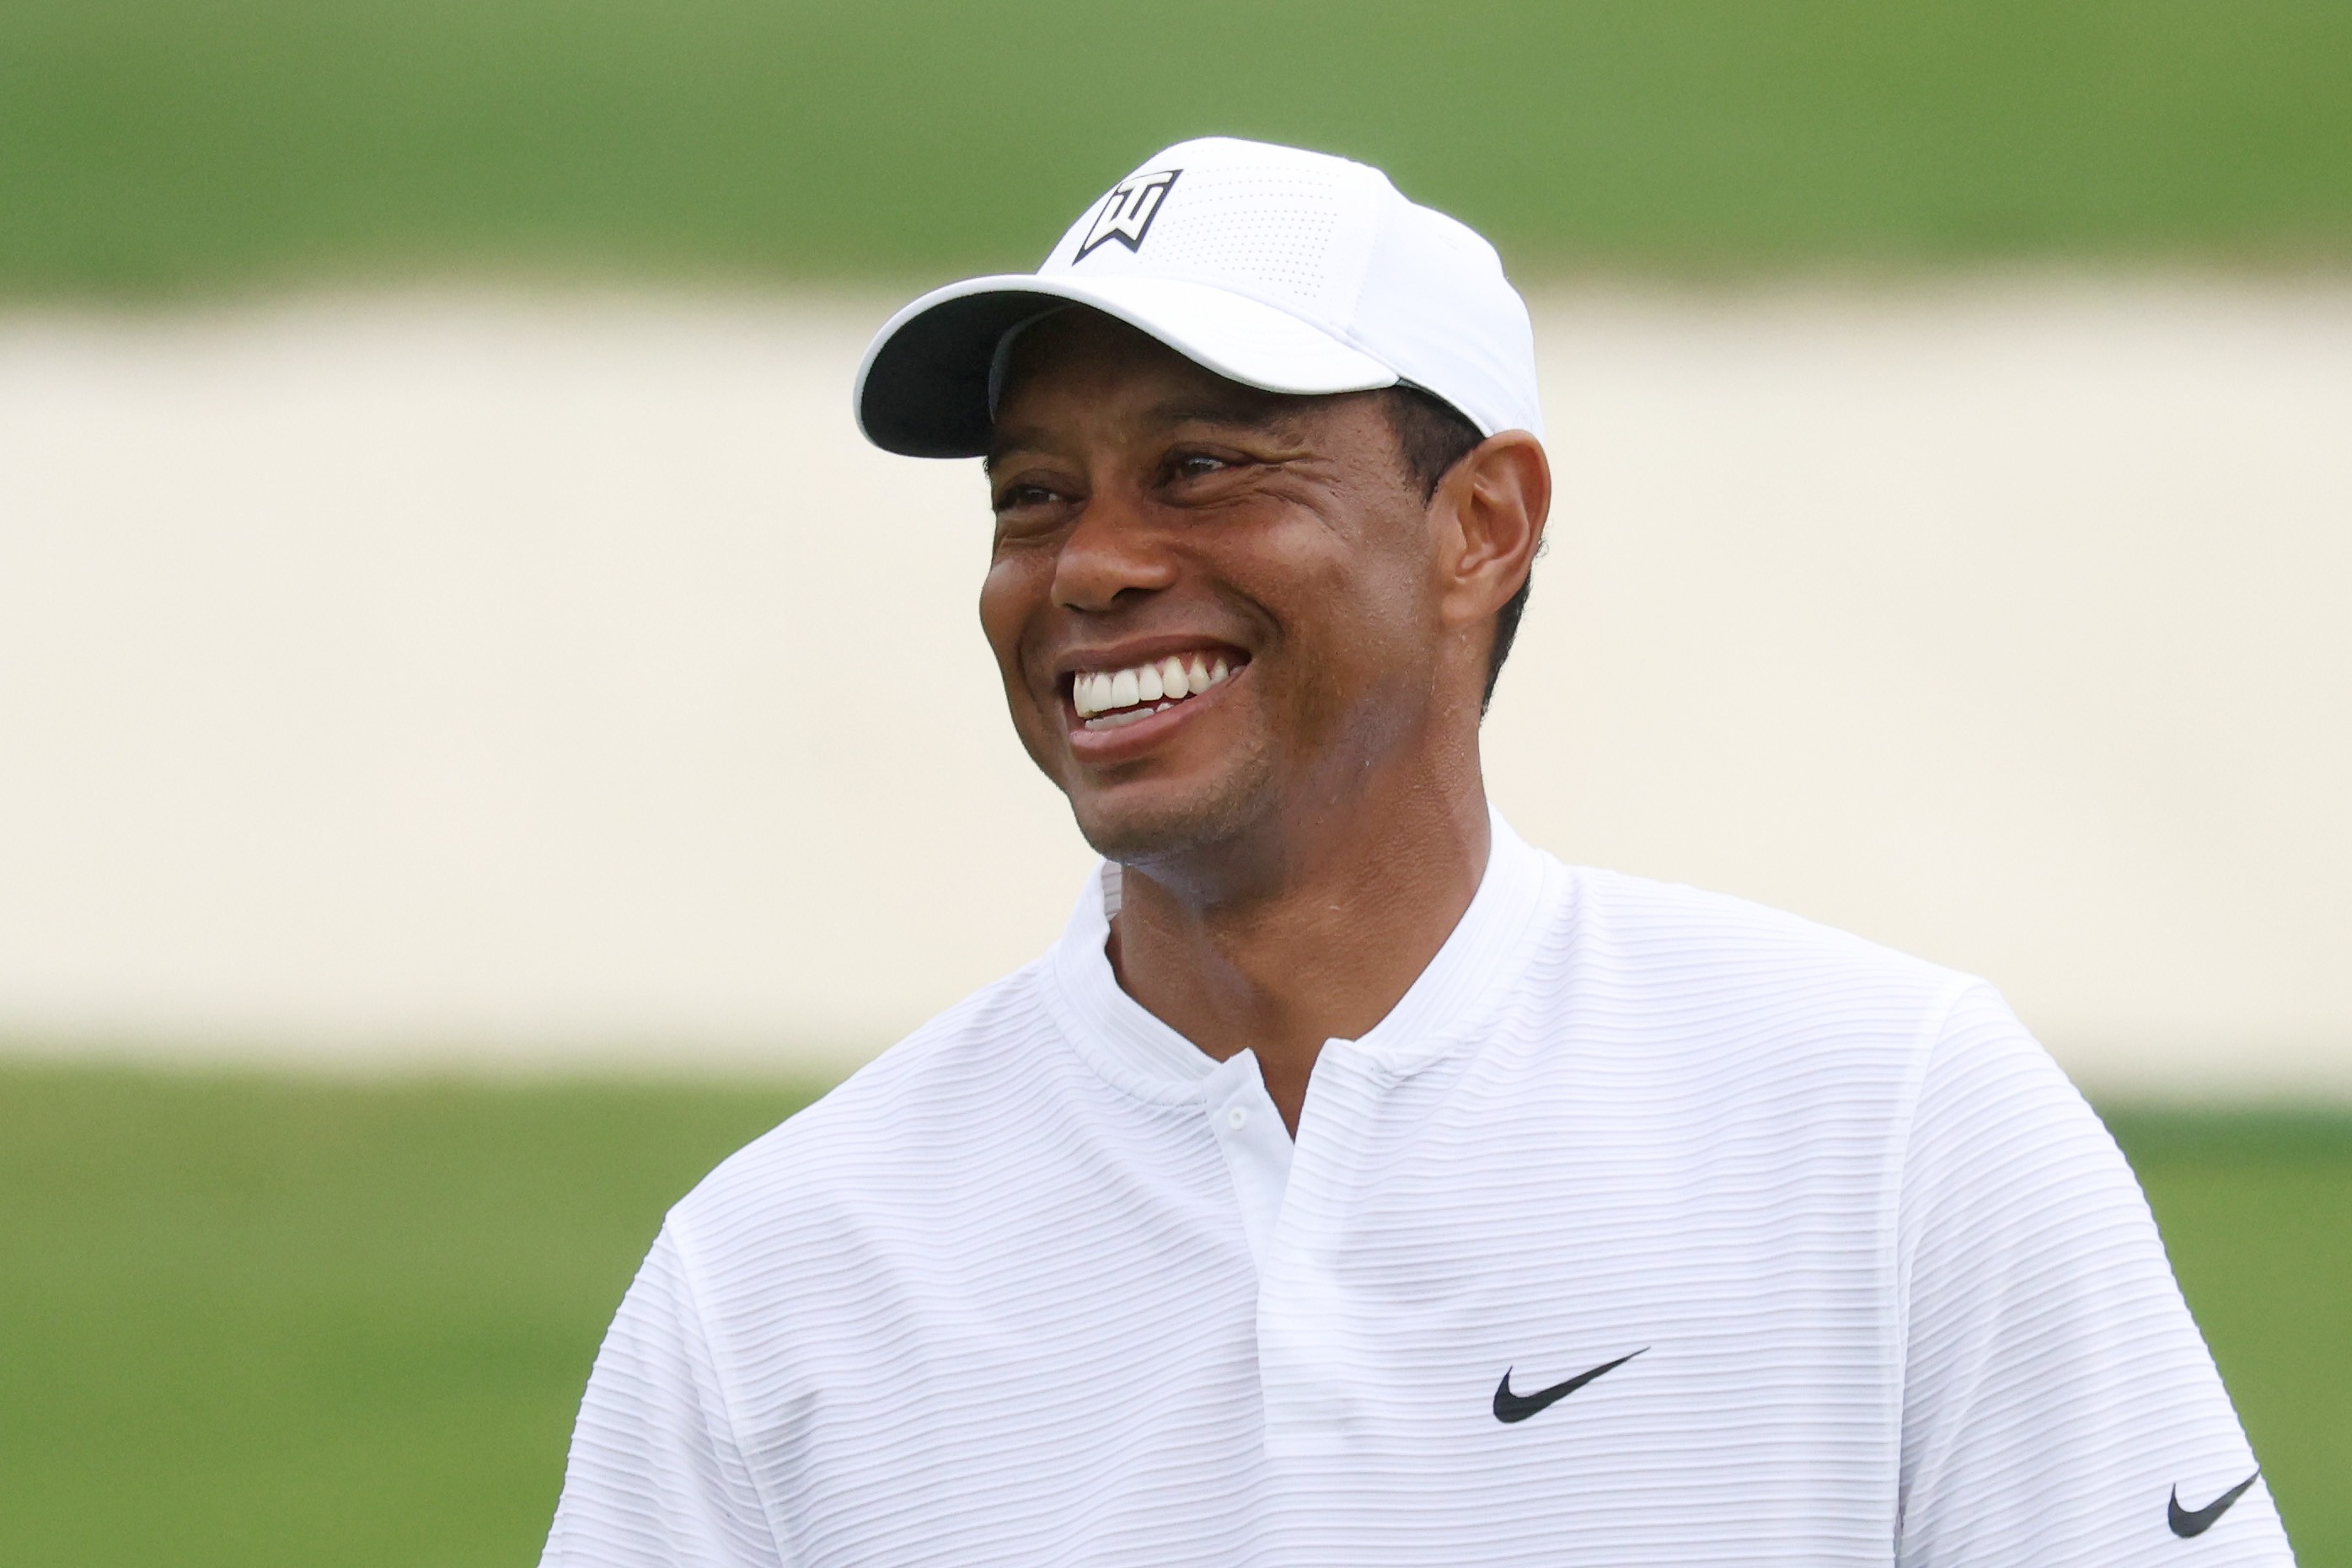 AUGUSTA, GEORGIA - NOVEMBER 11: Tiger Woods of the United States looks on during a practice round prior to the Masters at Augusta National Golf Club on November 11, 2020 in Augusta, Georgia. (Photo by Rob Carr/Getty Images) (Foto: Getty Images)